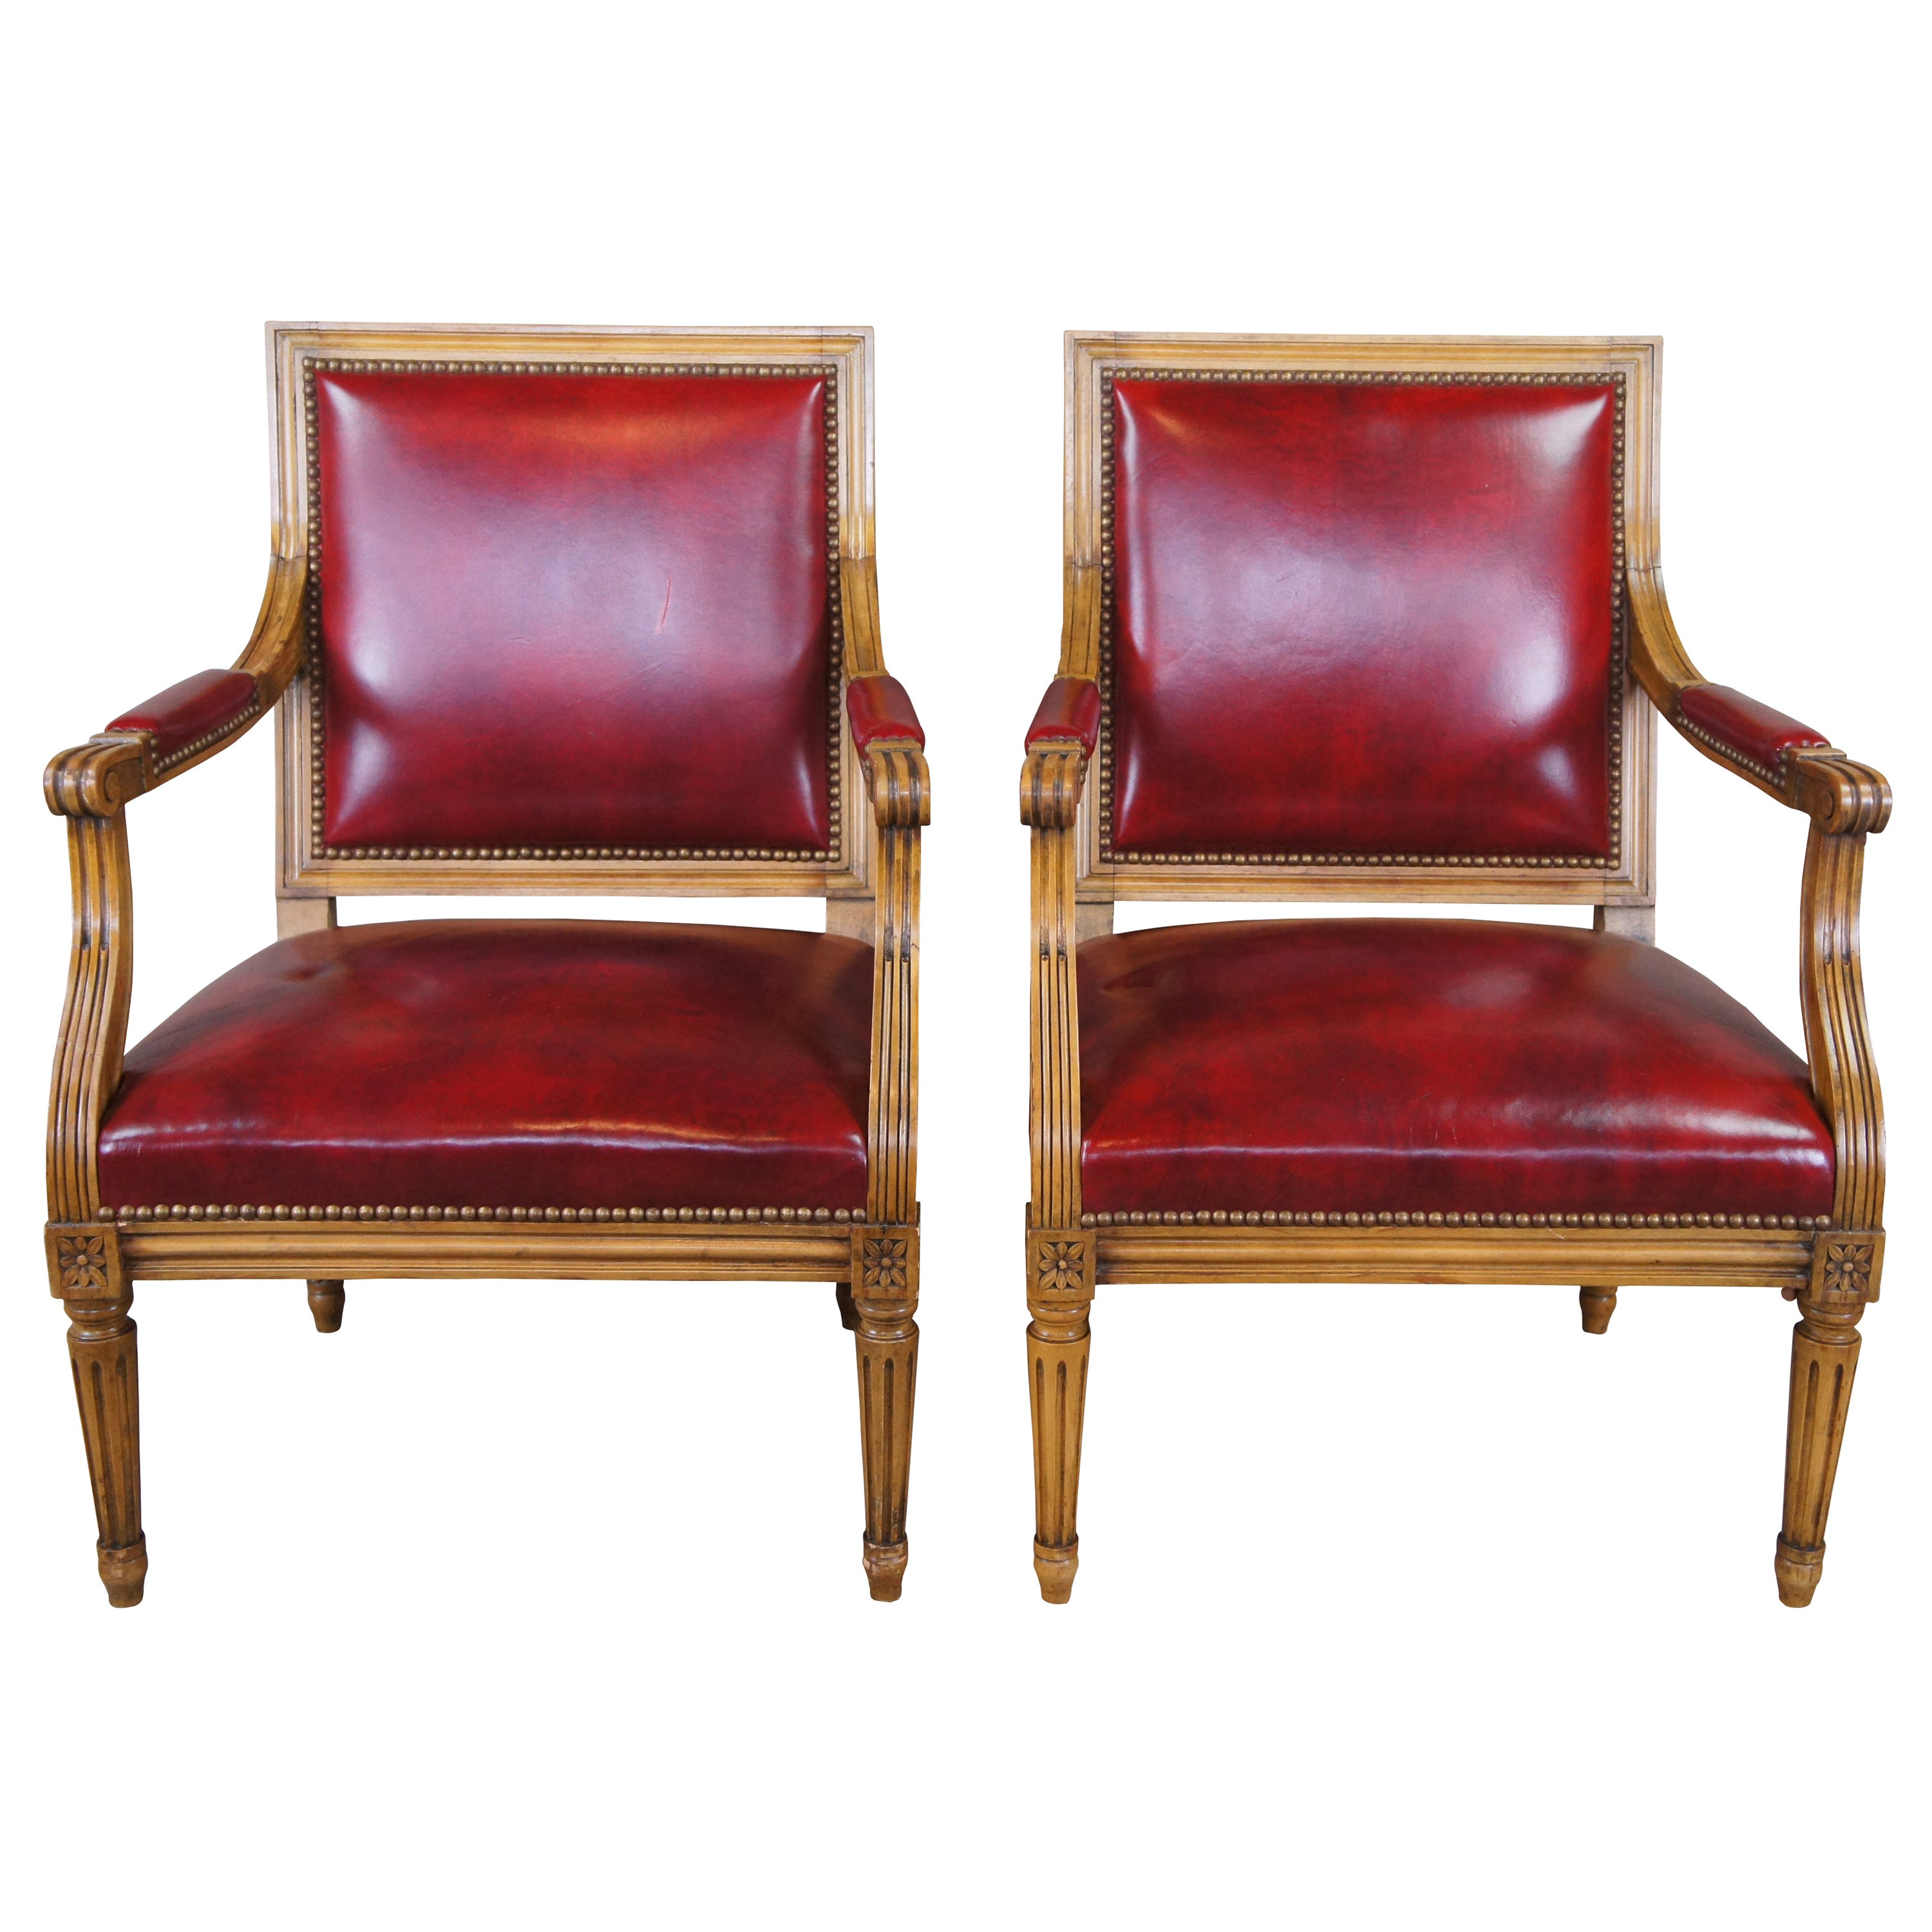 2 Vintage French Louis XVI Walnut & Red Leather Office Library Club Arm Chairs